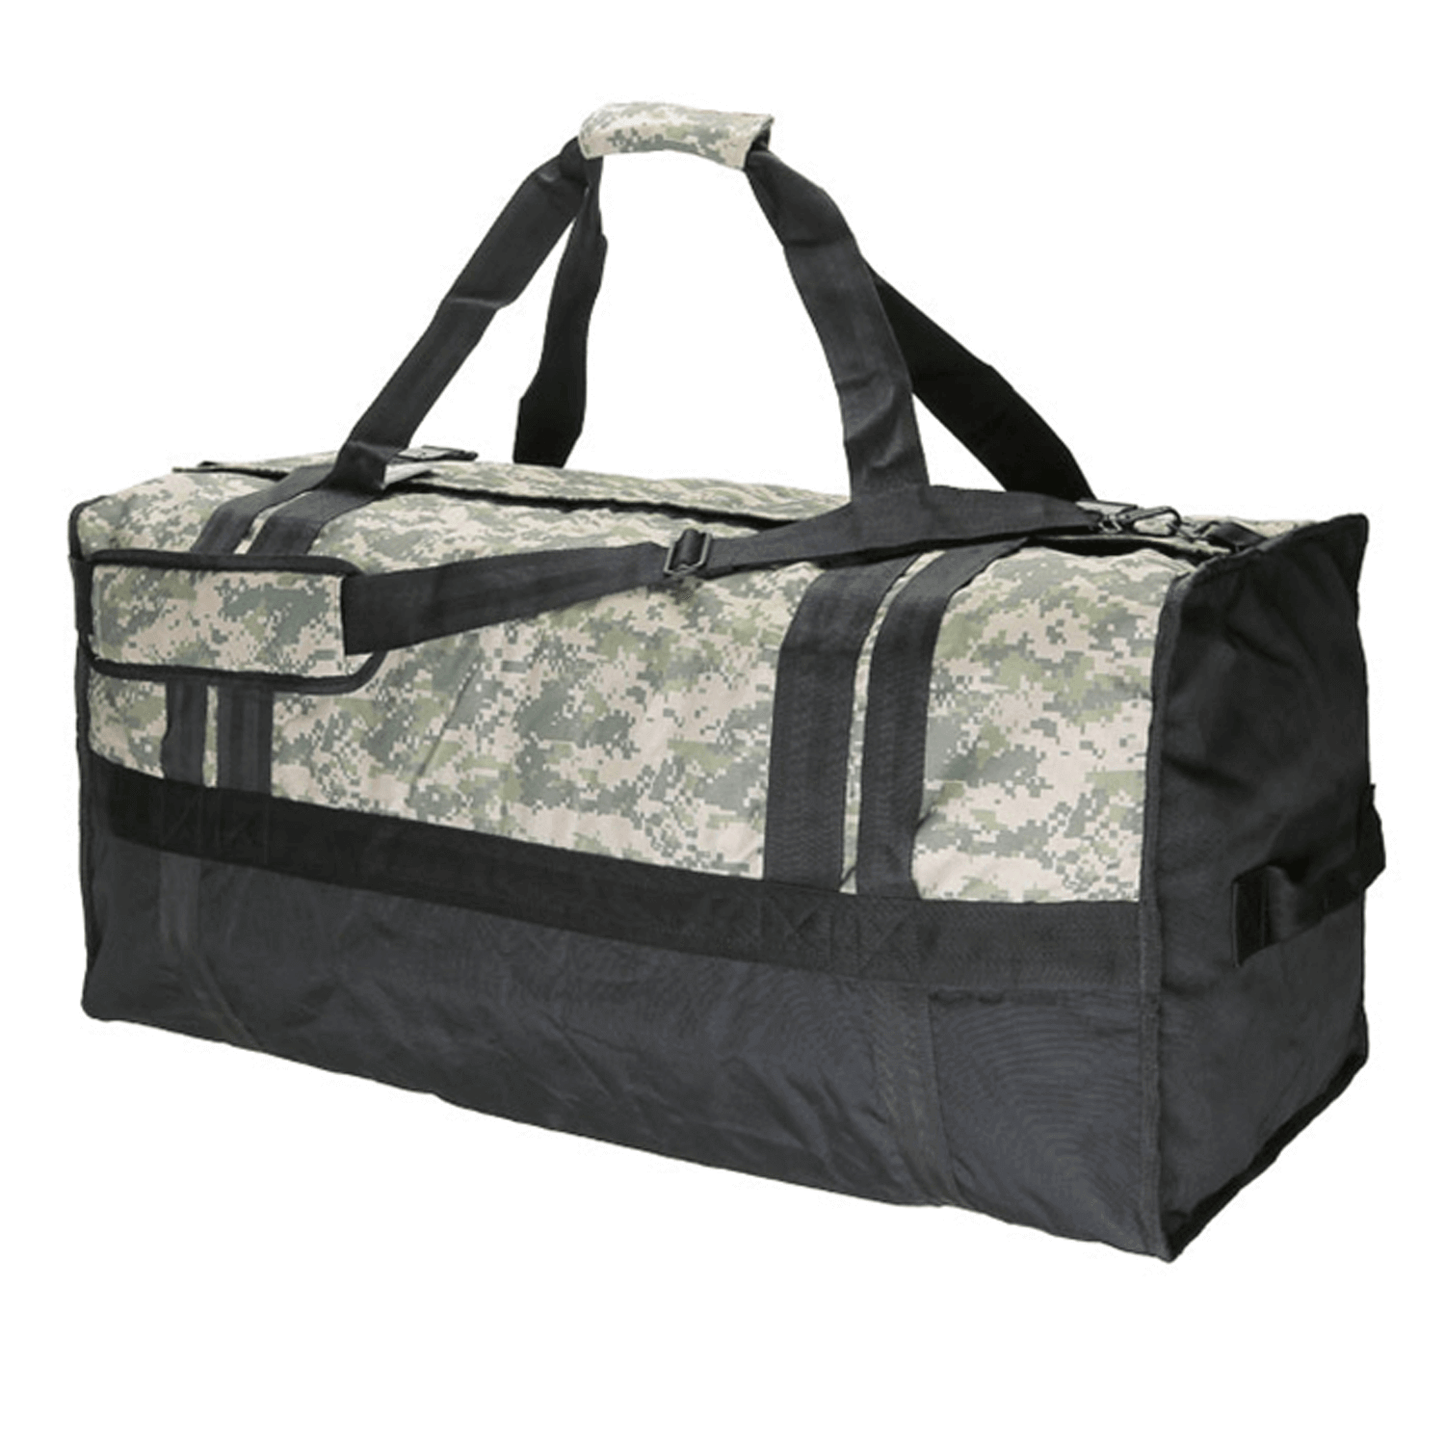 AWOL DAILY XX-Large Camo Square Bag 886162 Harvest & Extraction 853336007935